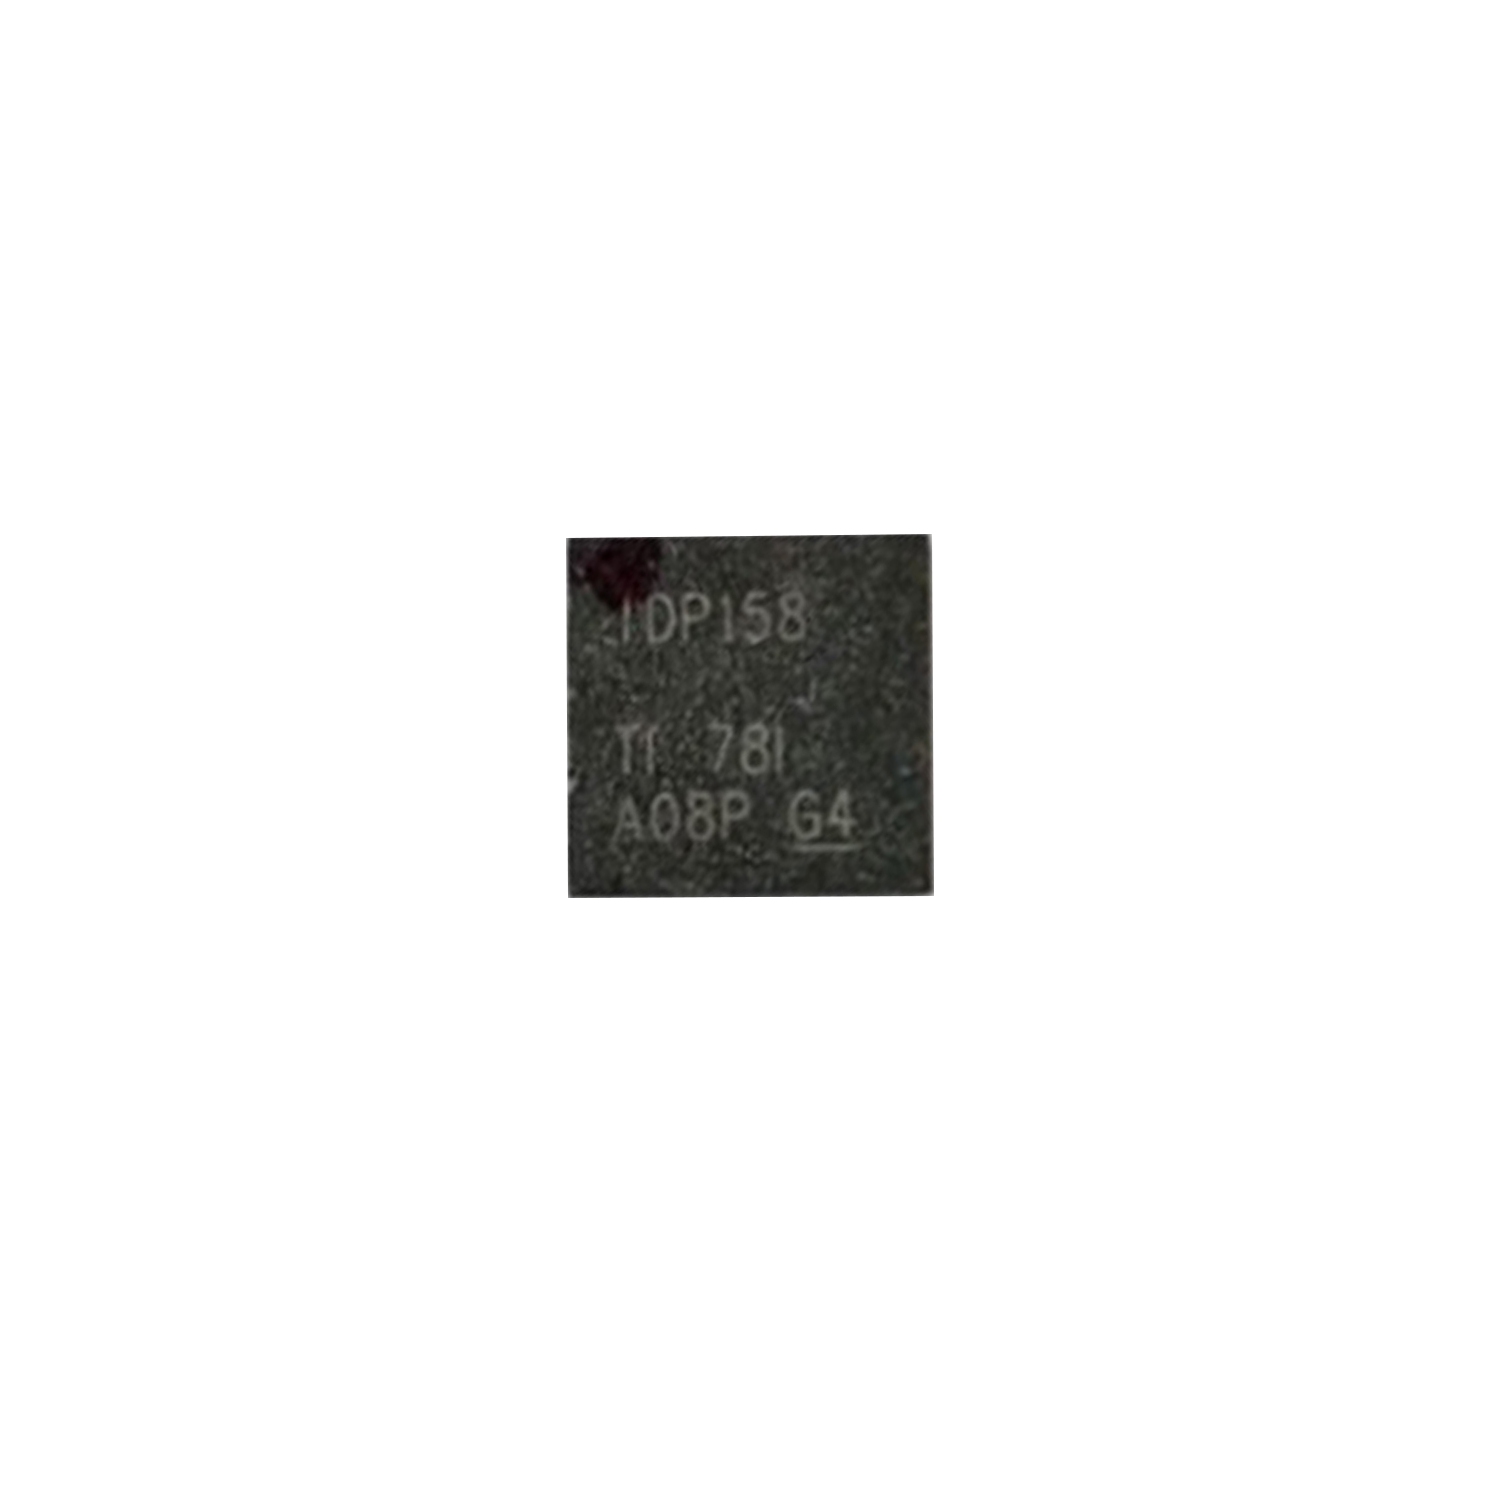 Replacement HDMI Control IC Chip For Microsoft Xbox One X